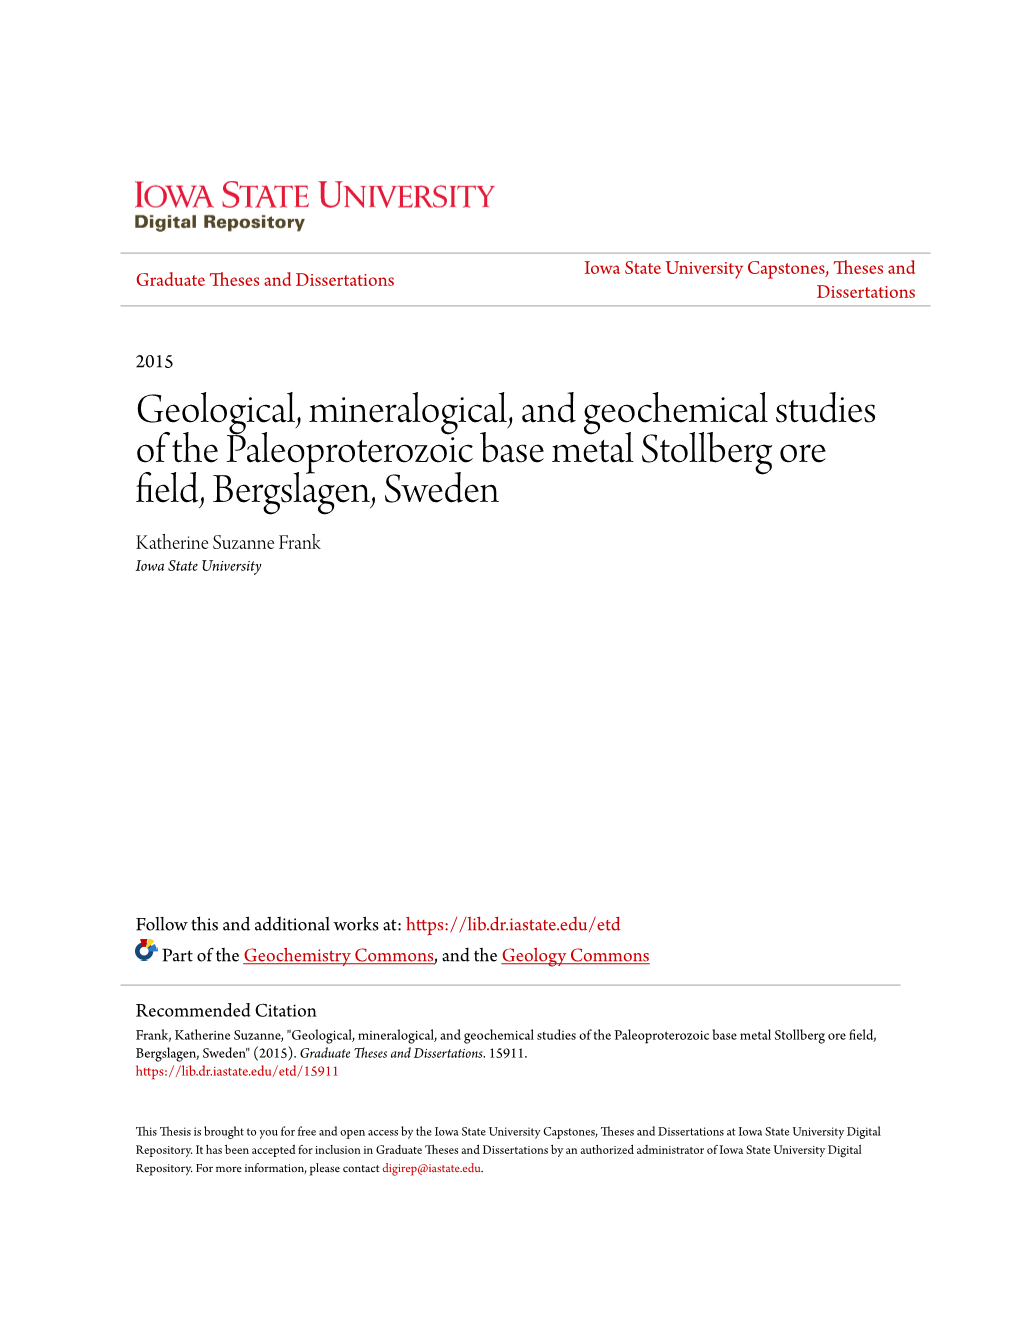 Geological, Mineralogical, and Geochemical Studies of The